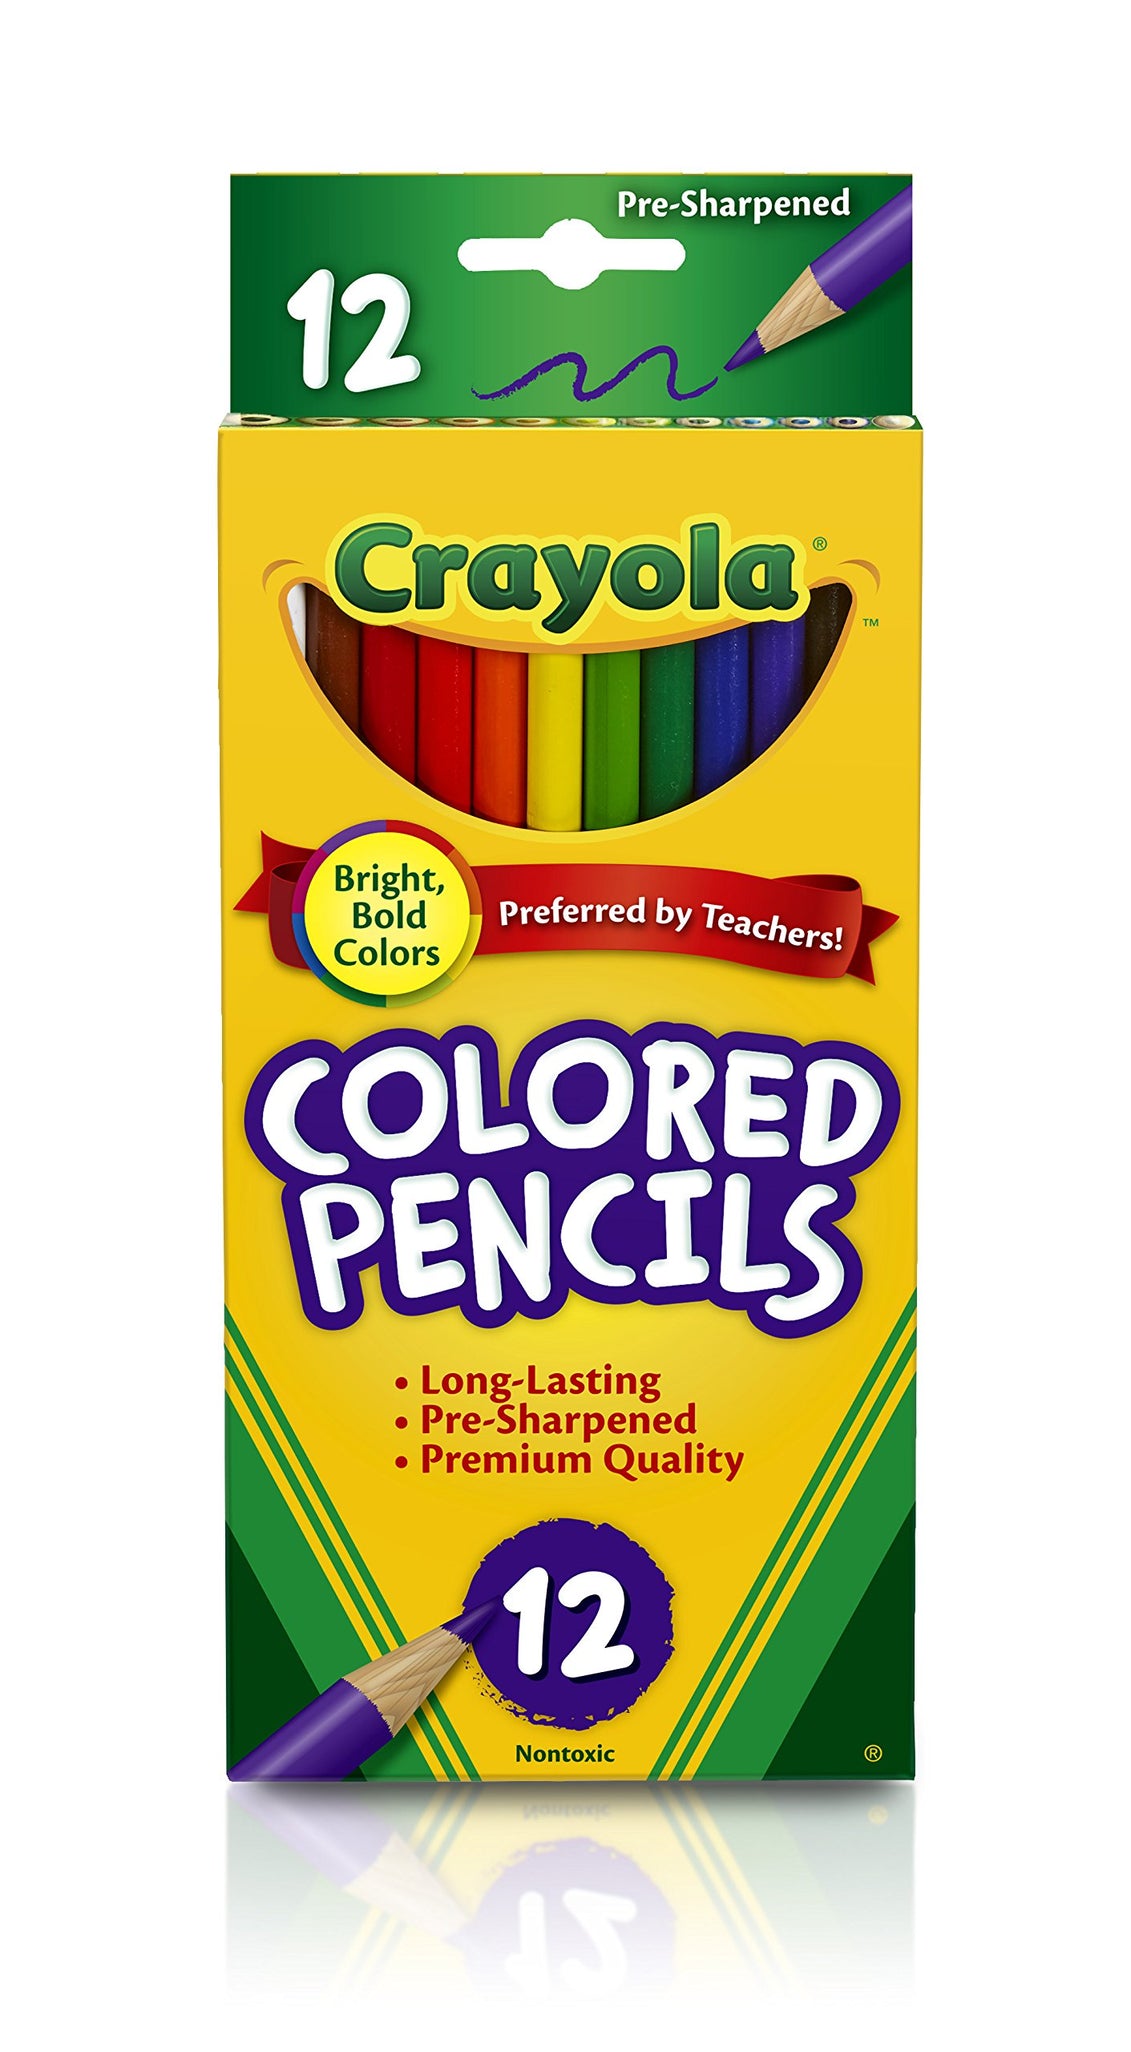 Crayola Back To School Supplies for Girls & Boys, Crayons, Markers & Colored Pencils, Stocking Stuffers, Gifts, 80 Pieces